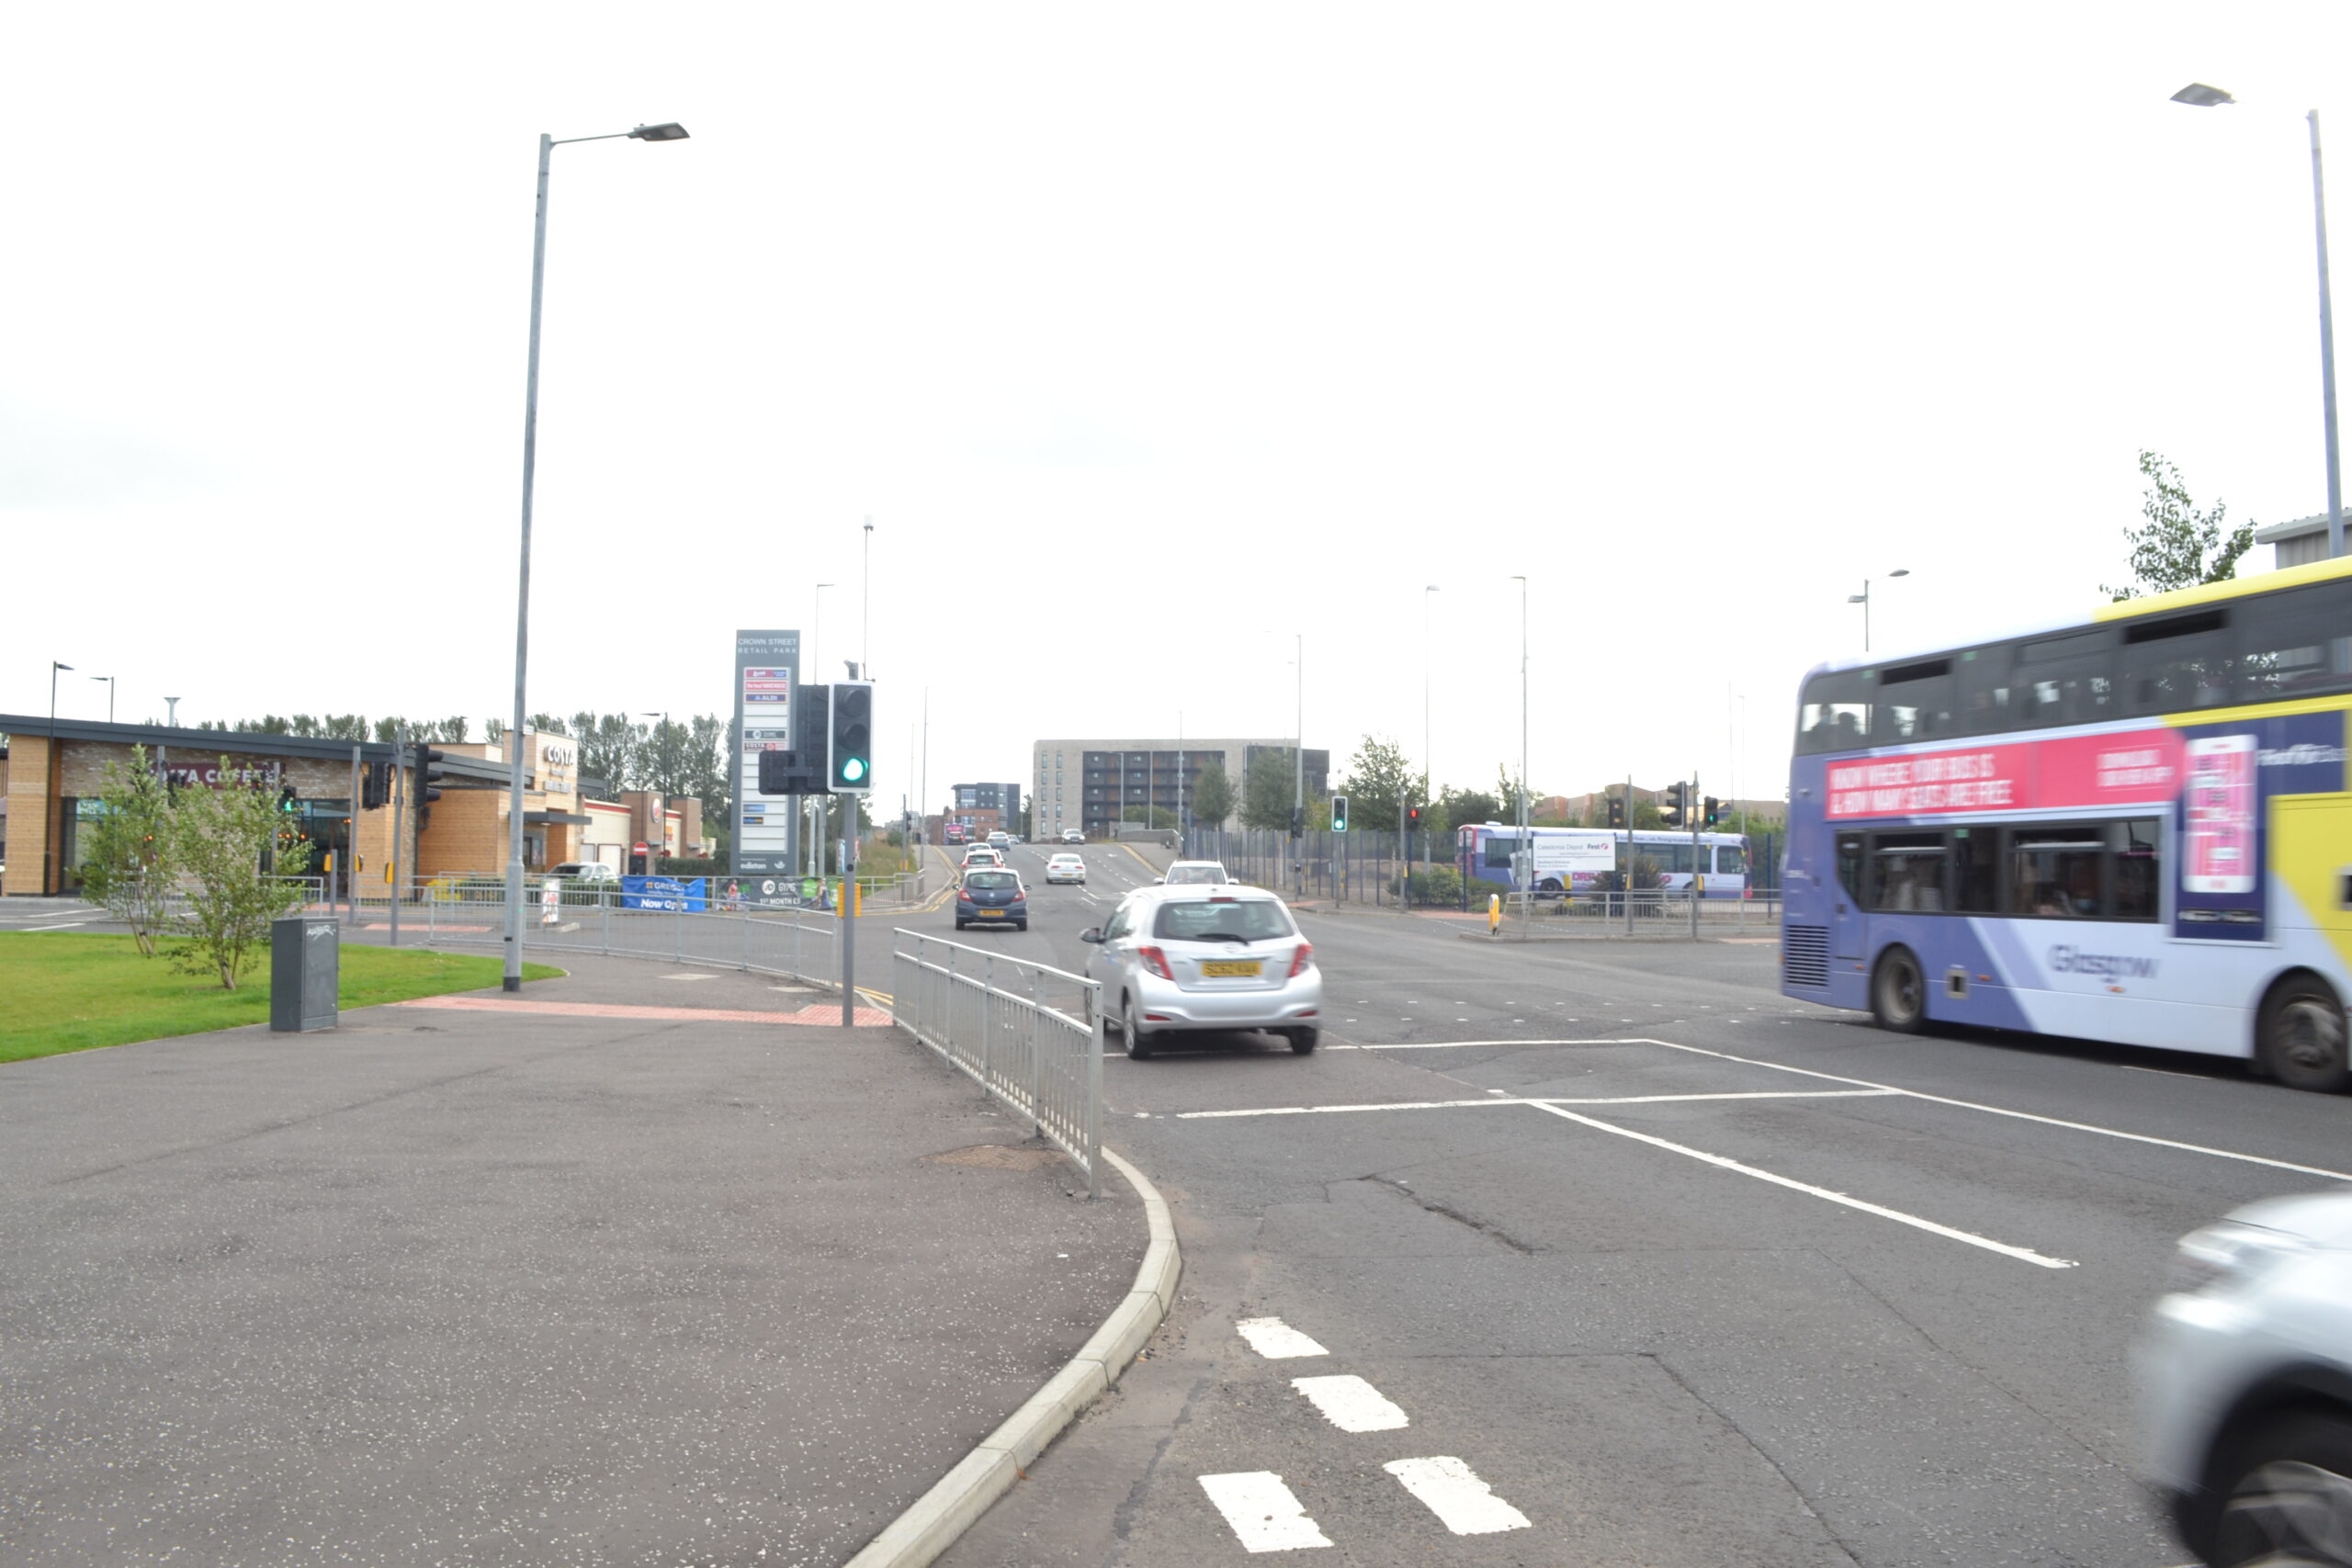 replacing traffic light detector loops in Glasgow WITH THE TMA-122 RADAR